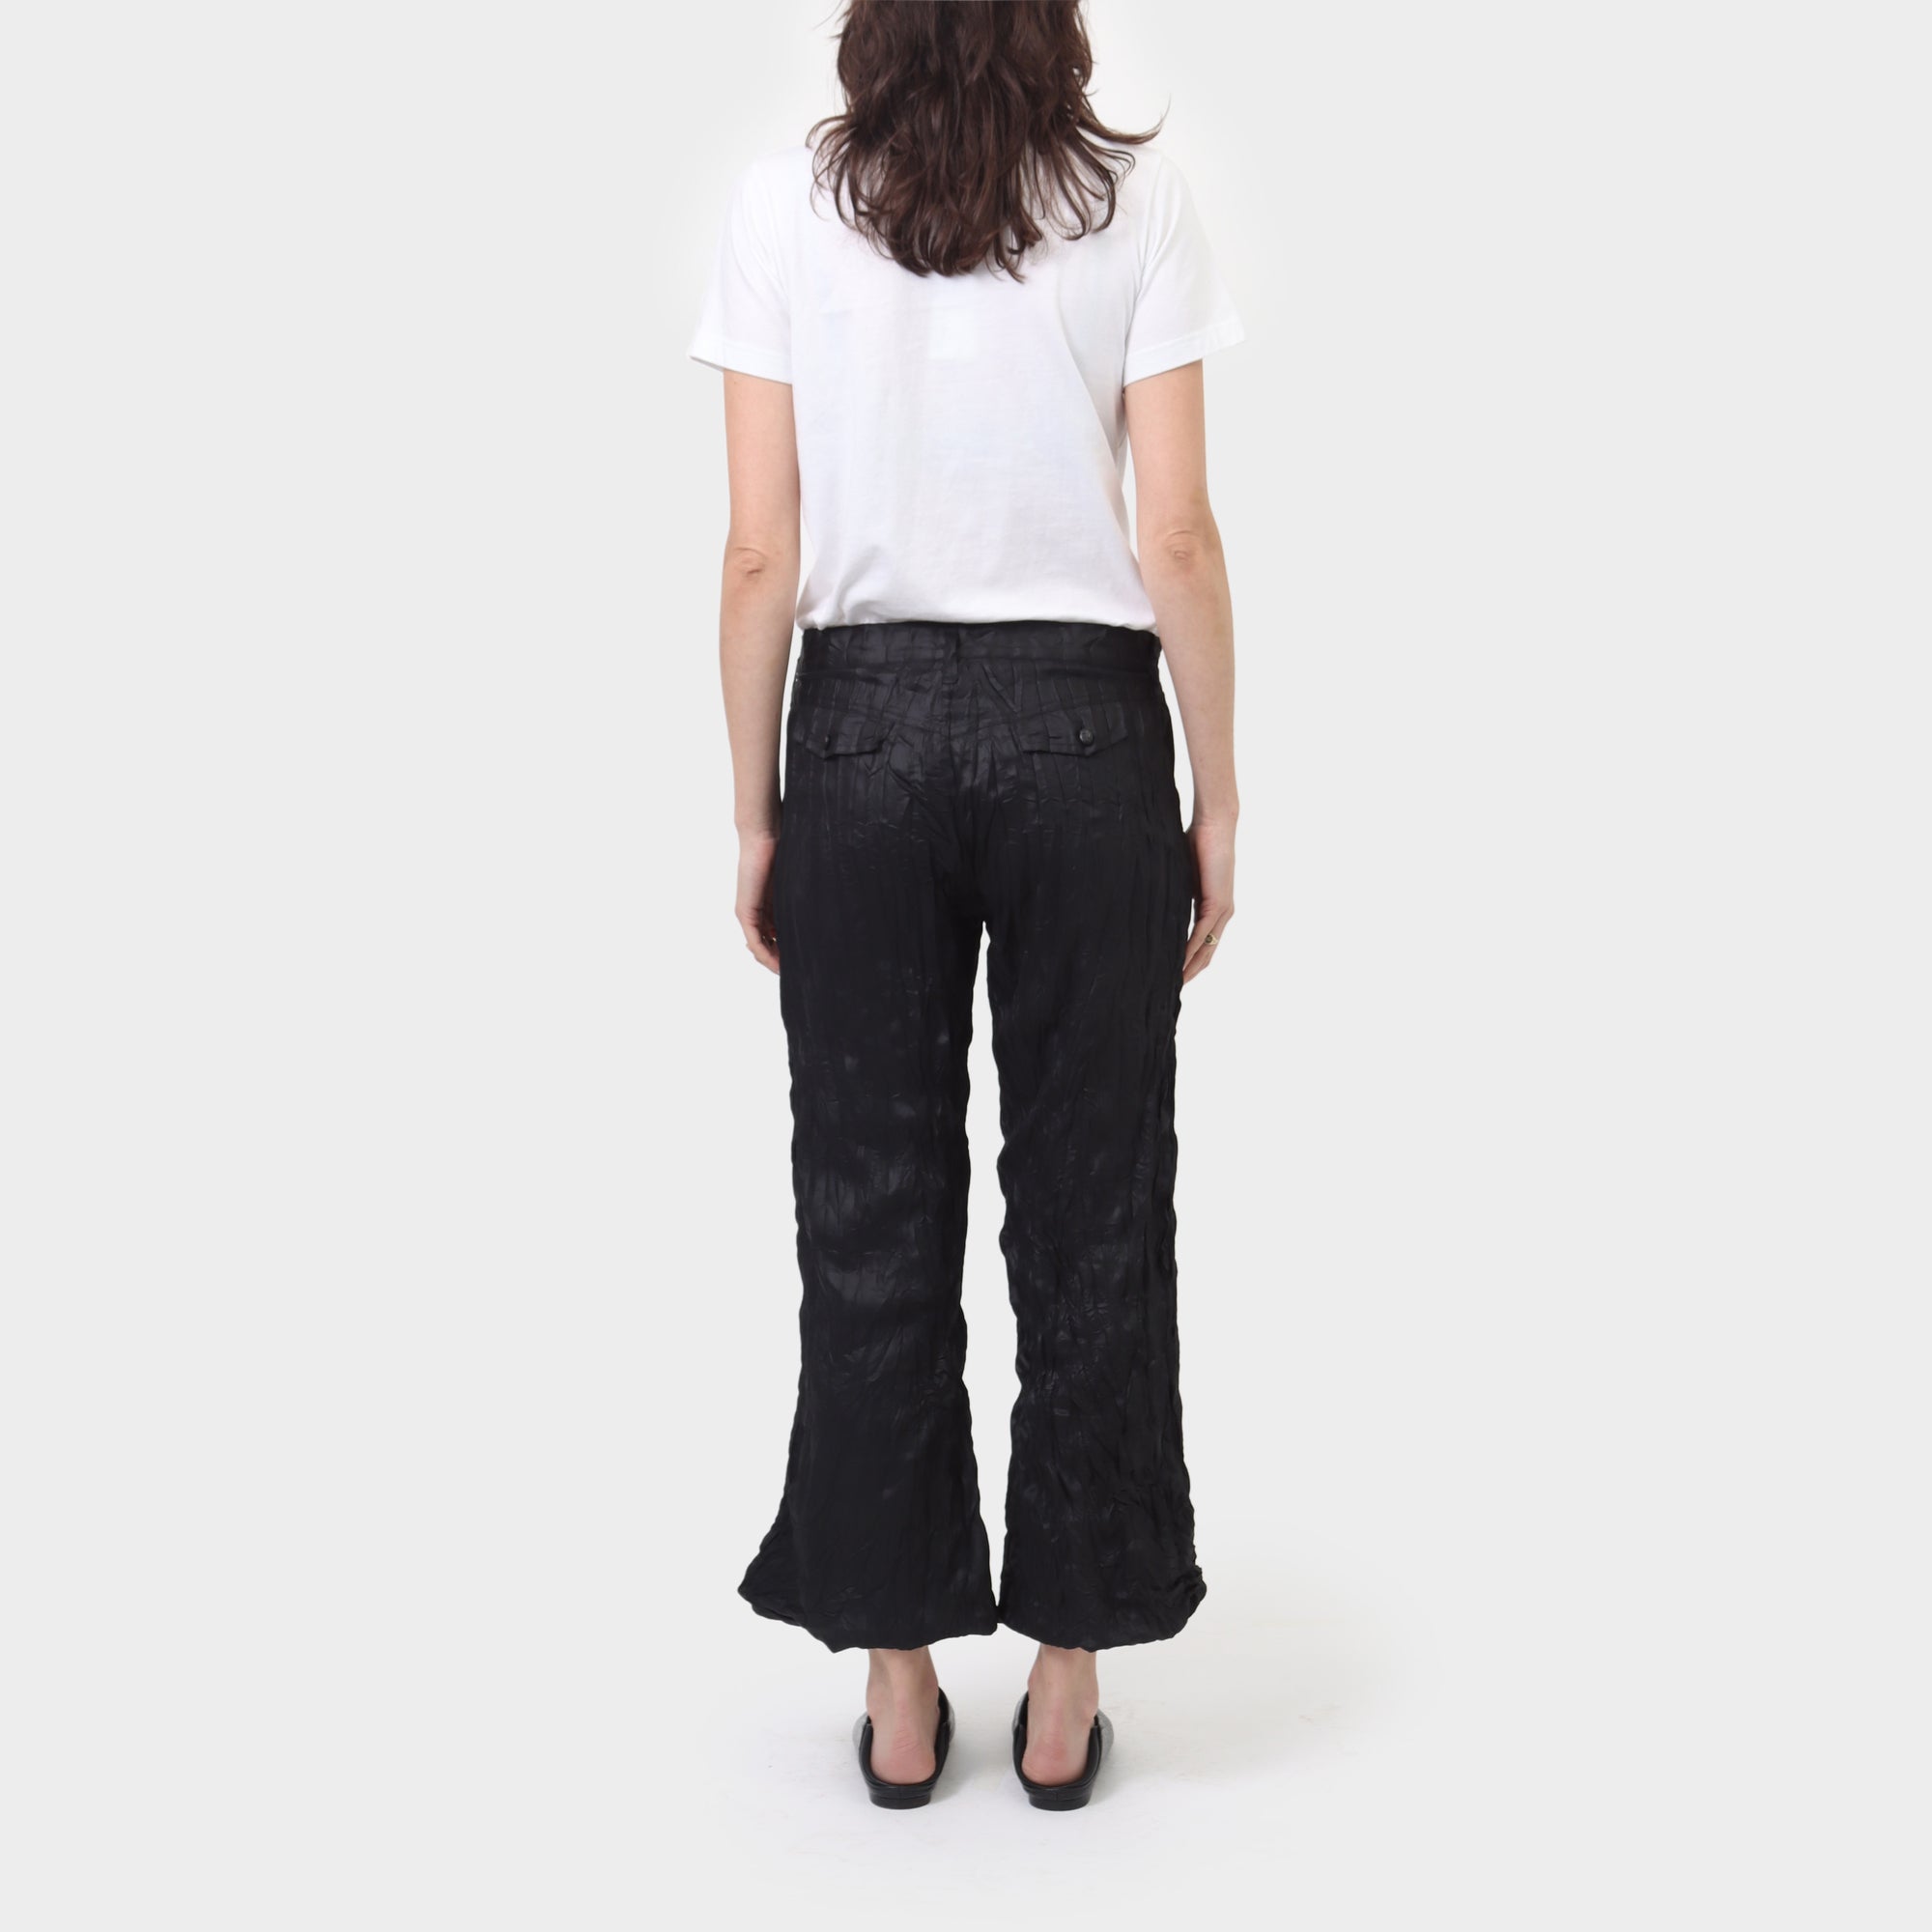 Issey Miyake Fete Crushed Pleat Pants